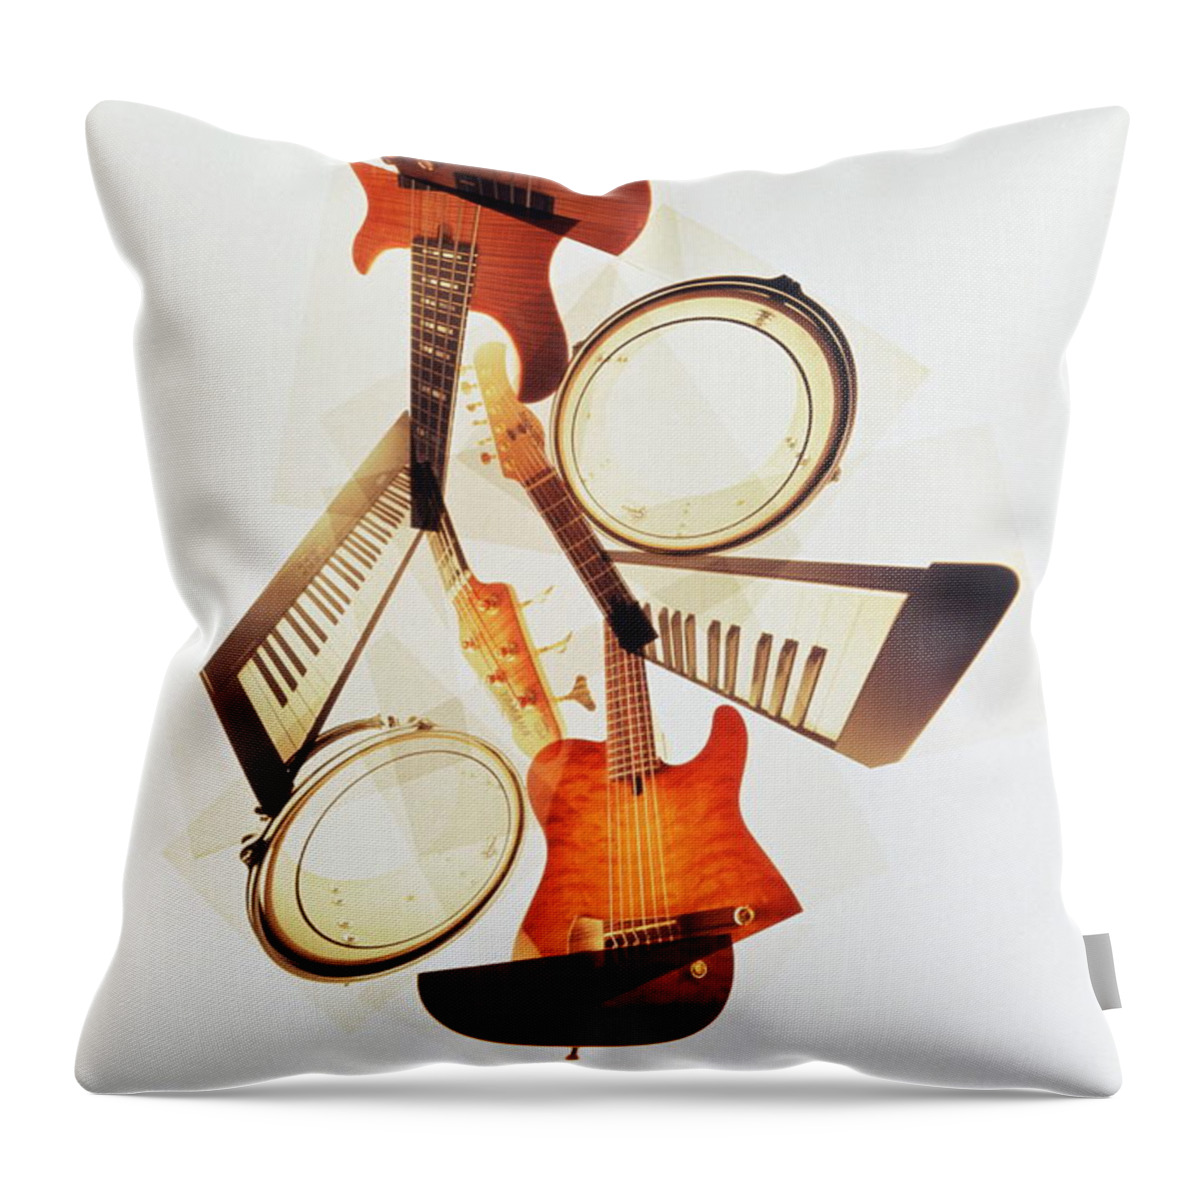 White Background Throw Pillow featuring the photograph Musical Instruments by Hans Neleman